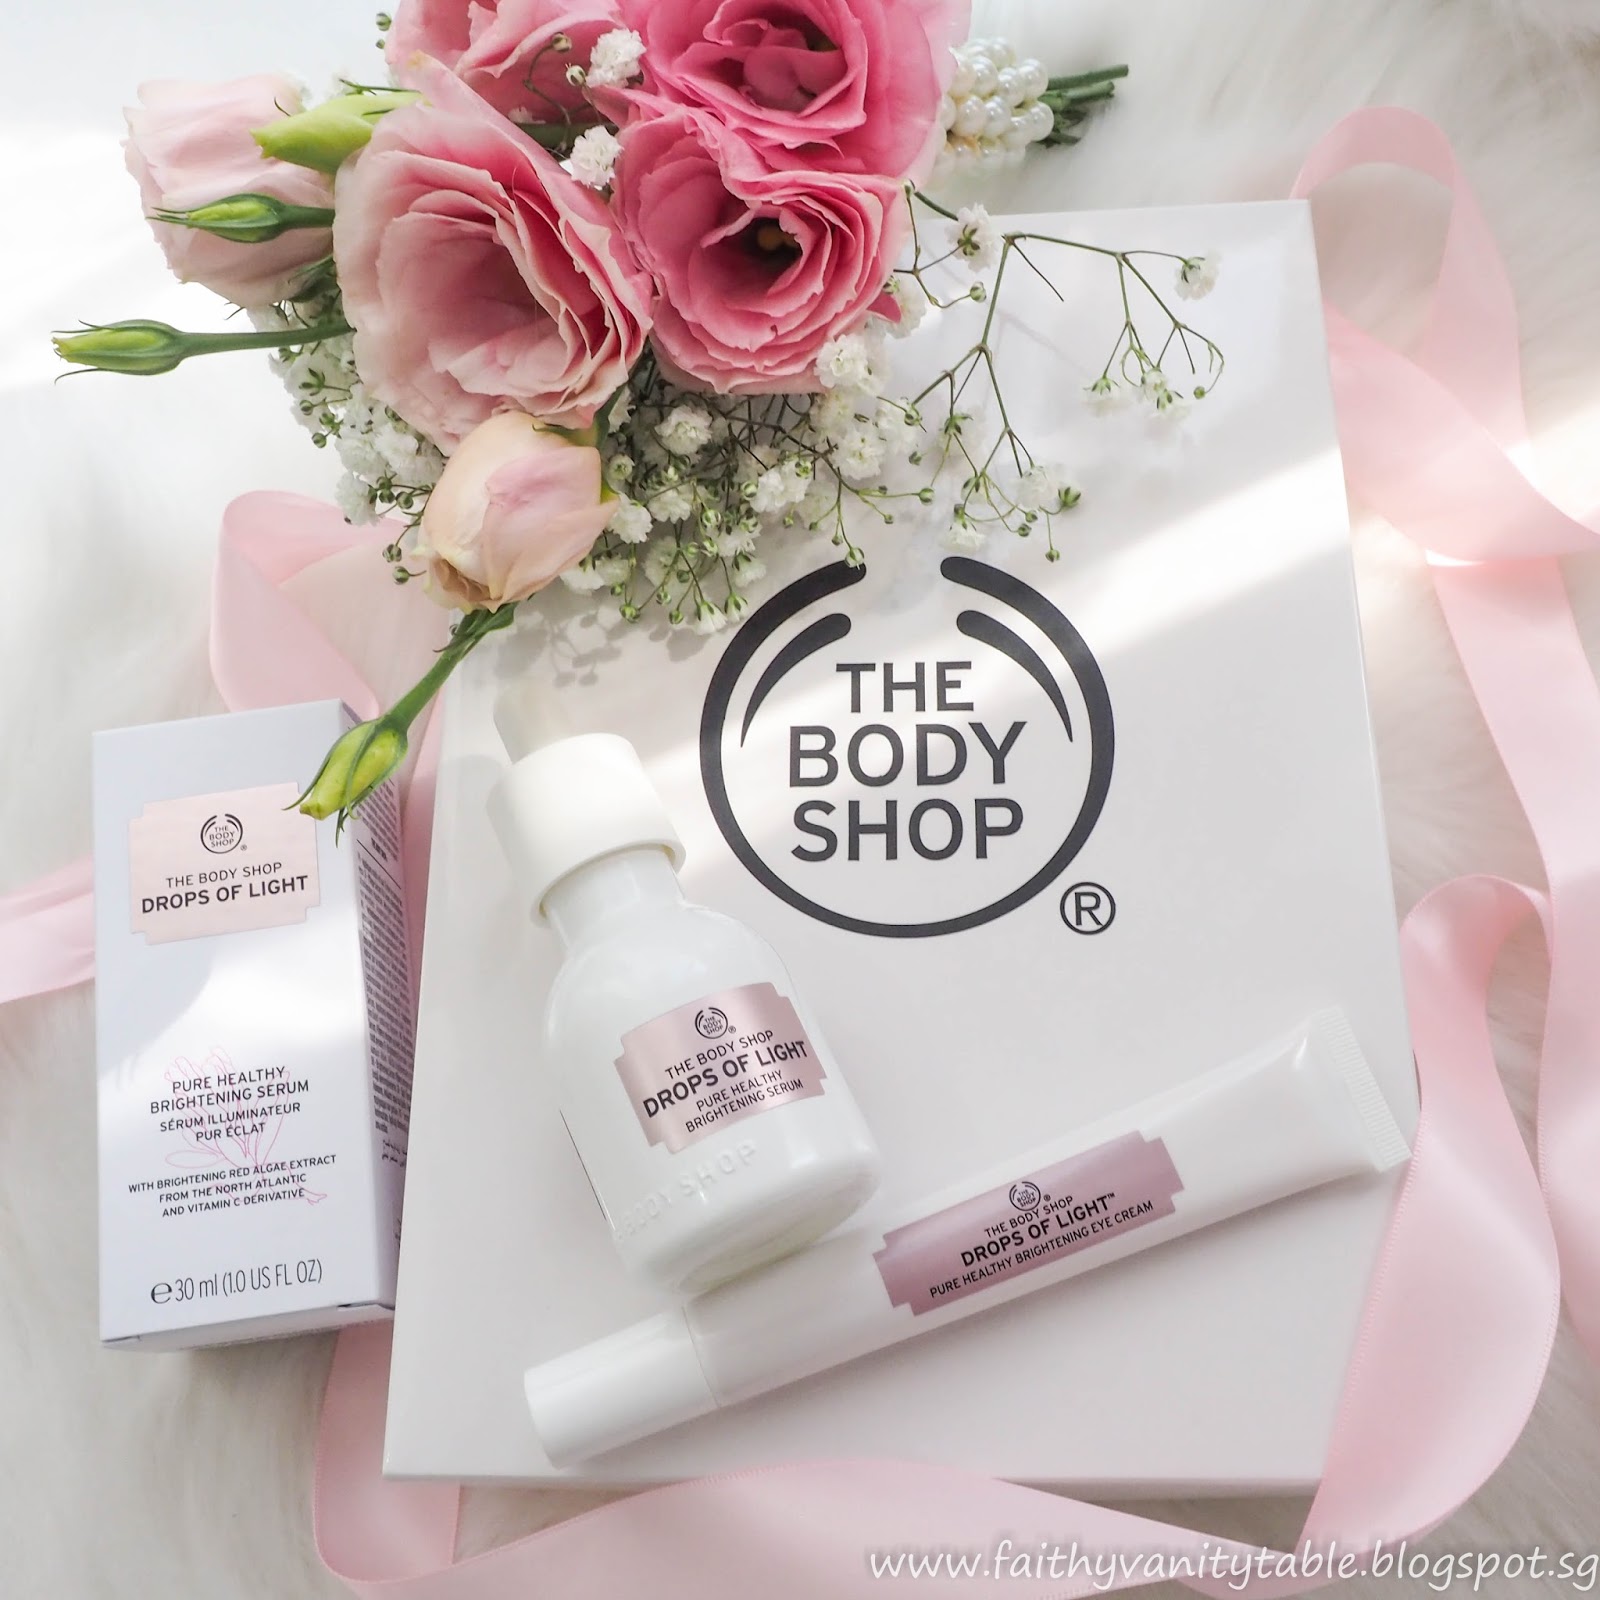 Singapore Beauty, Travel and Lifestyle Blog: Review of The Body Shop Drops Of Light™ Brightening Eye Cream and Pure Healthy Brightening Serum